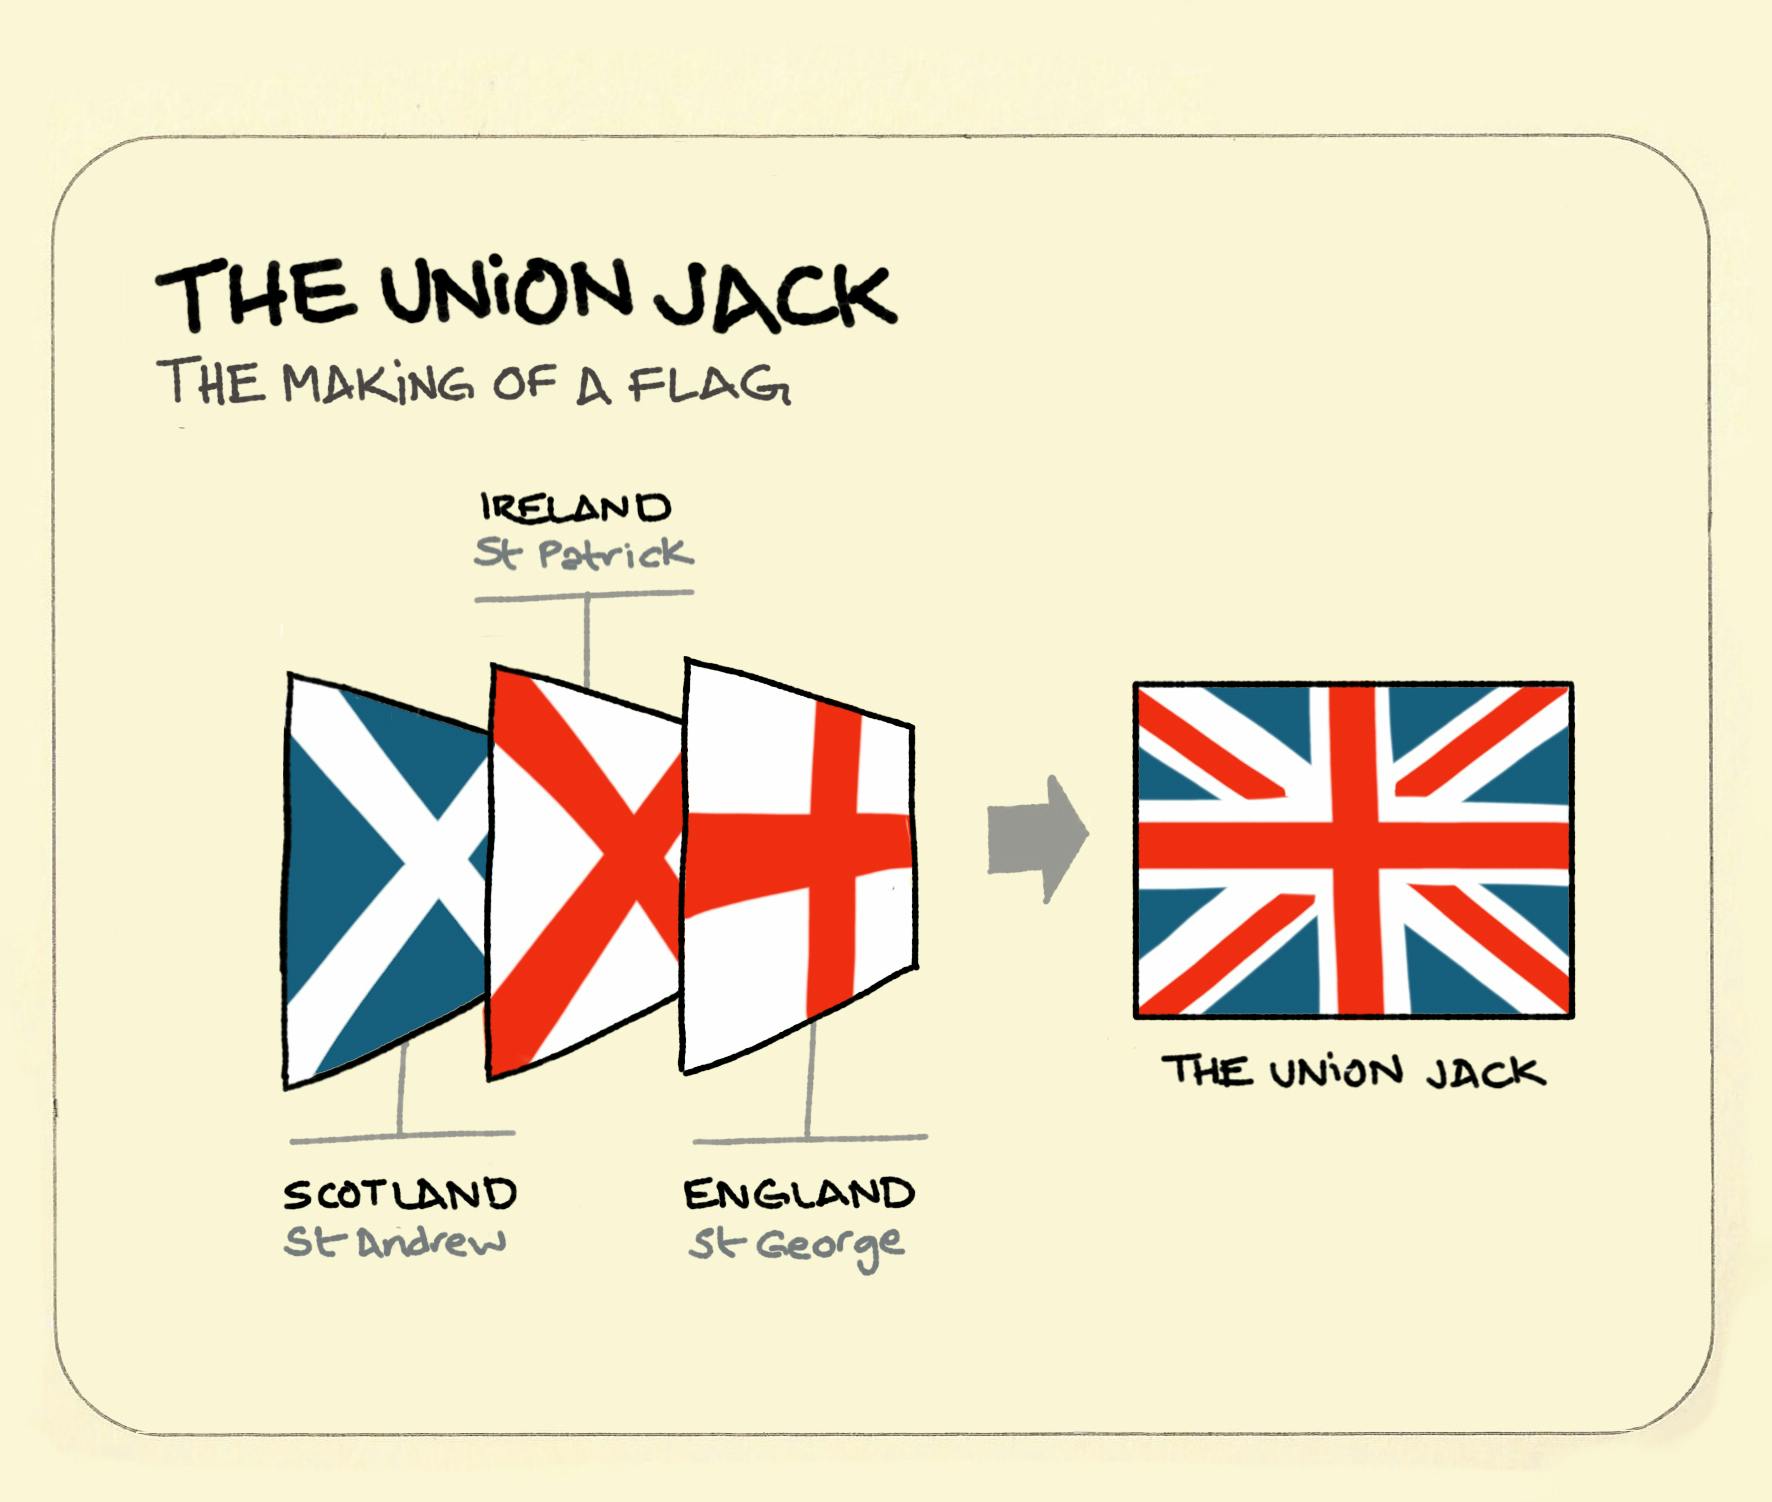 The Union Jack - Sketchplanations